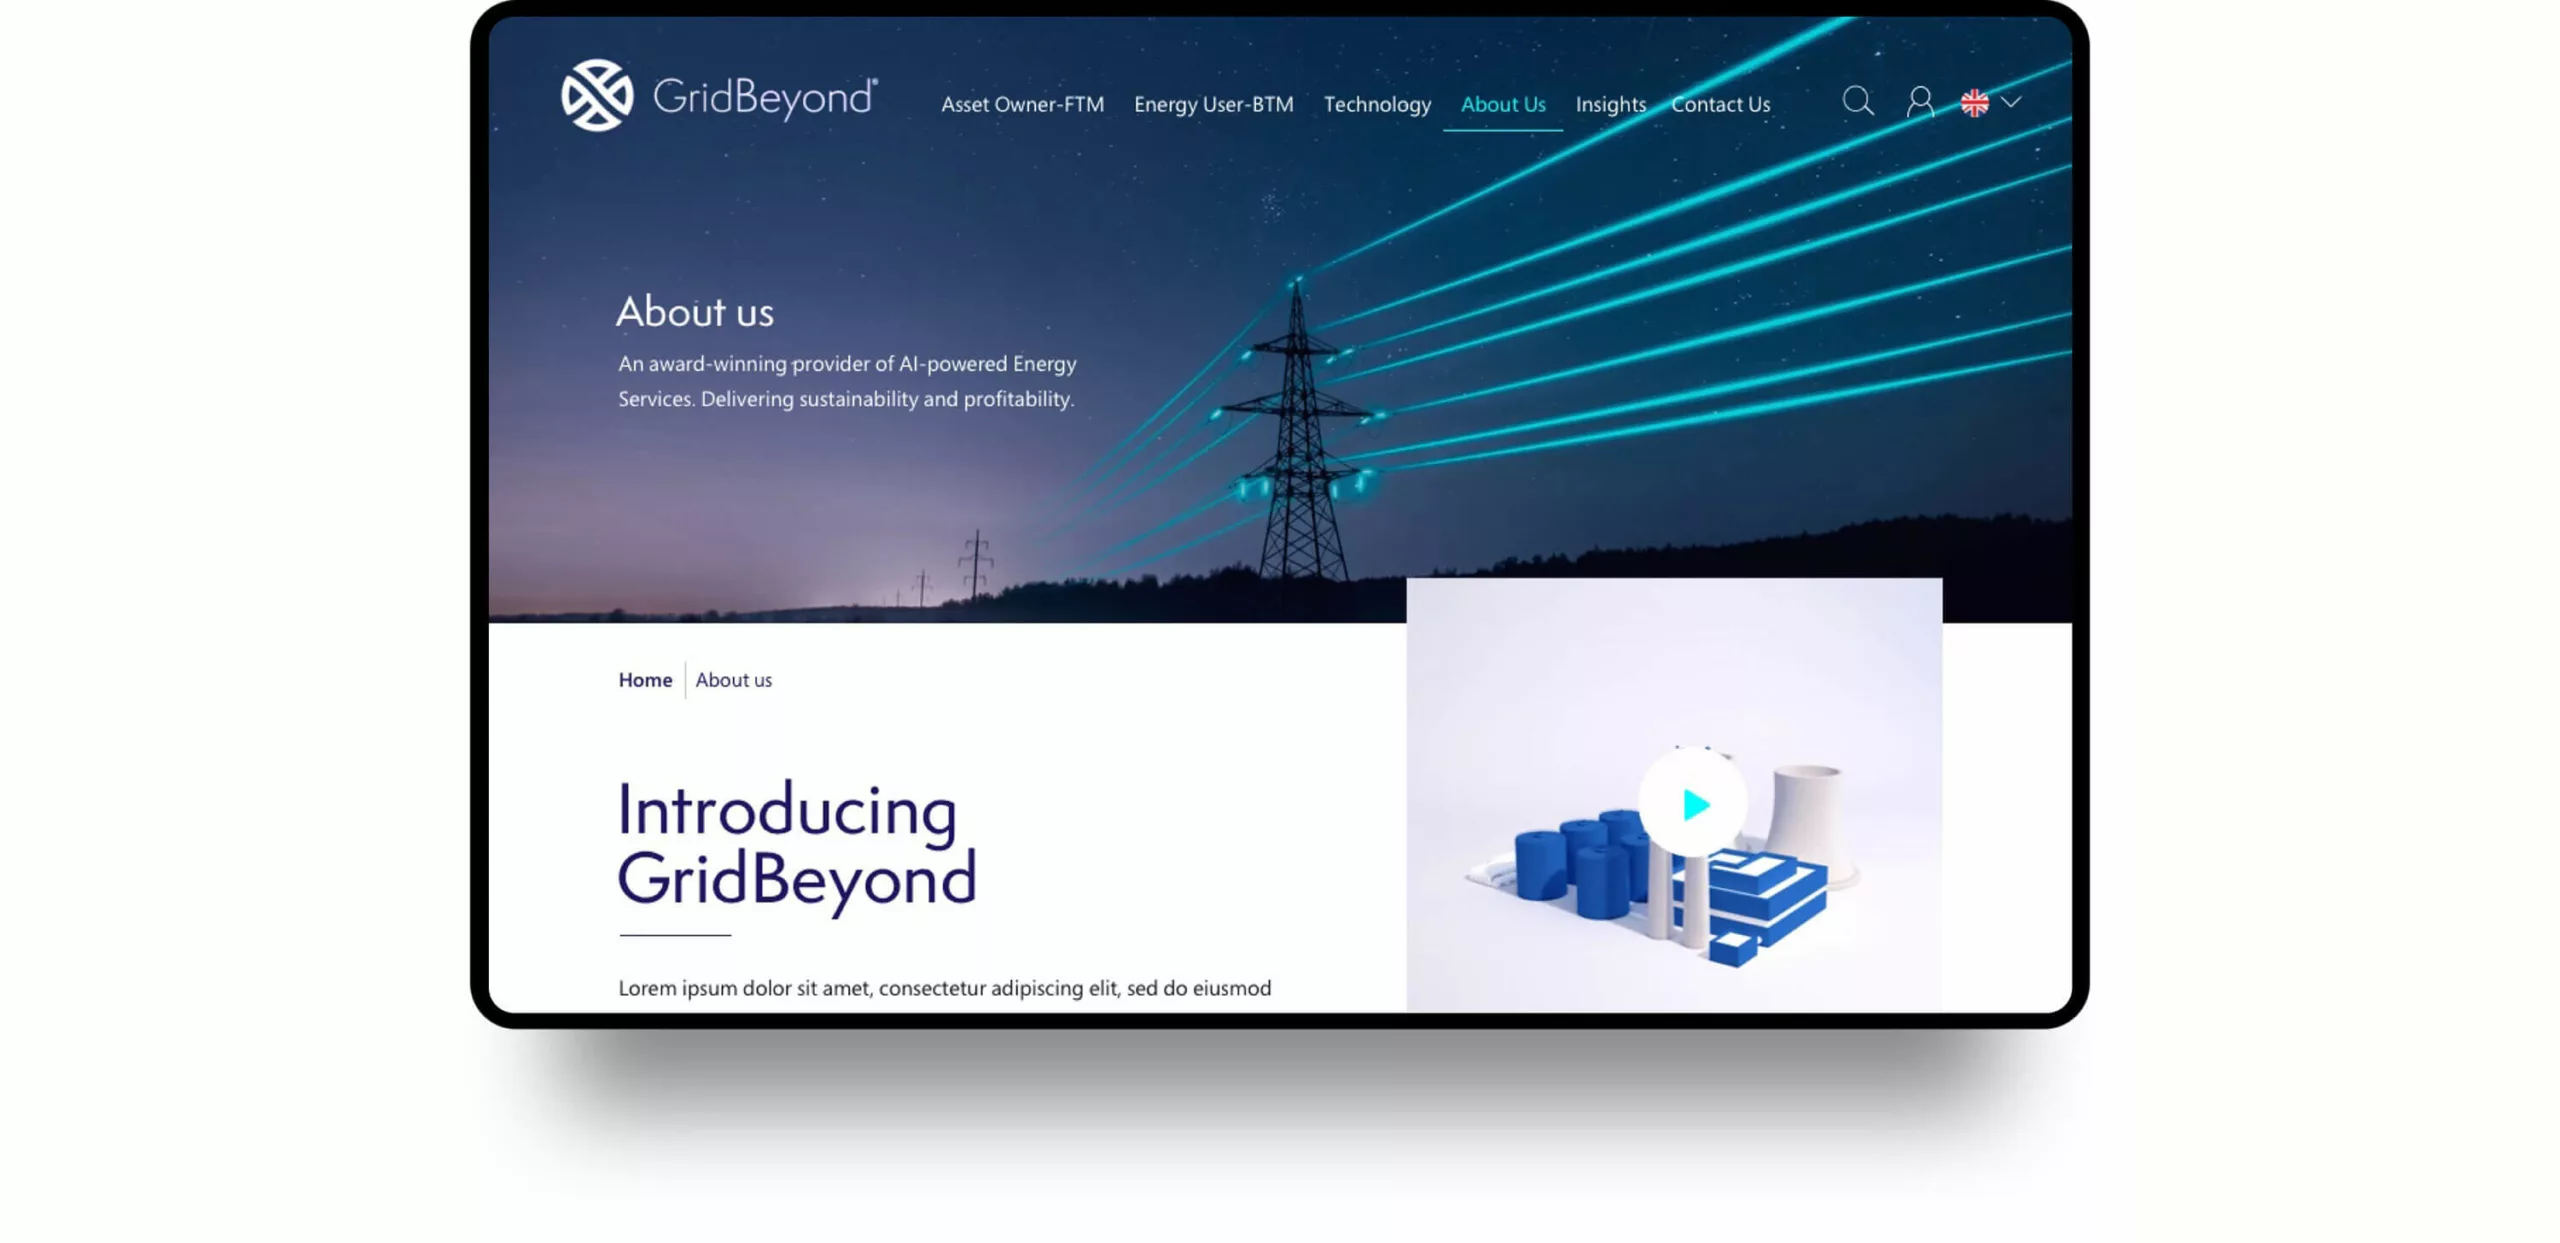 A sleek and modern website design for GridBeyond, featuring a clean layout and intuitive navigation.